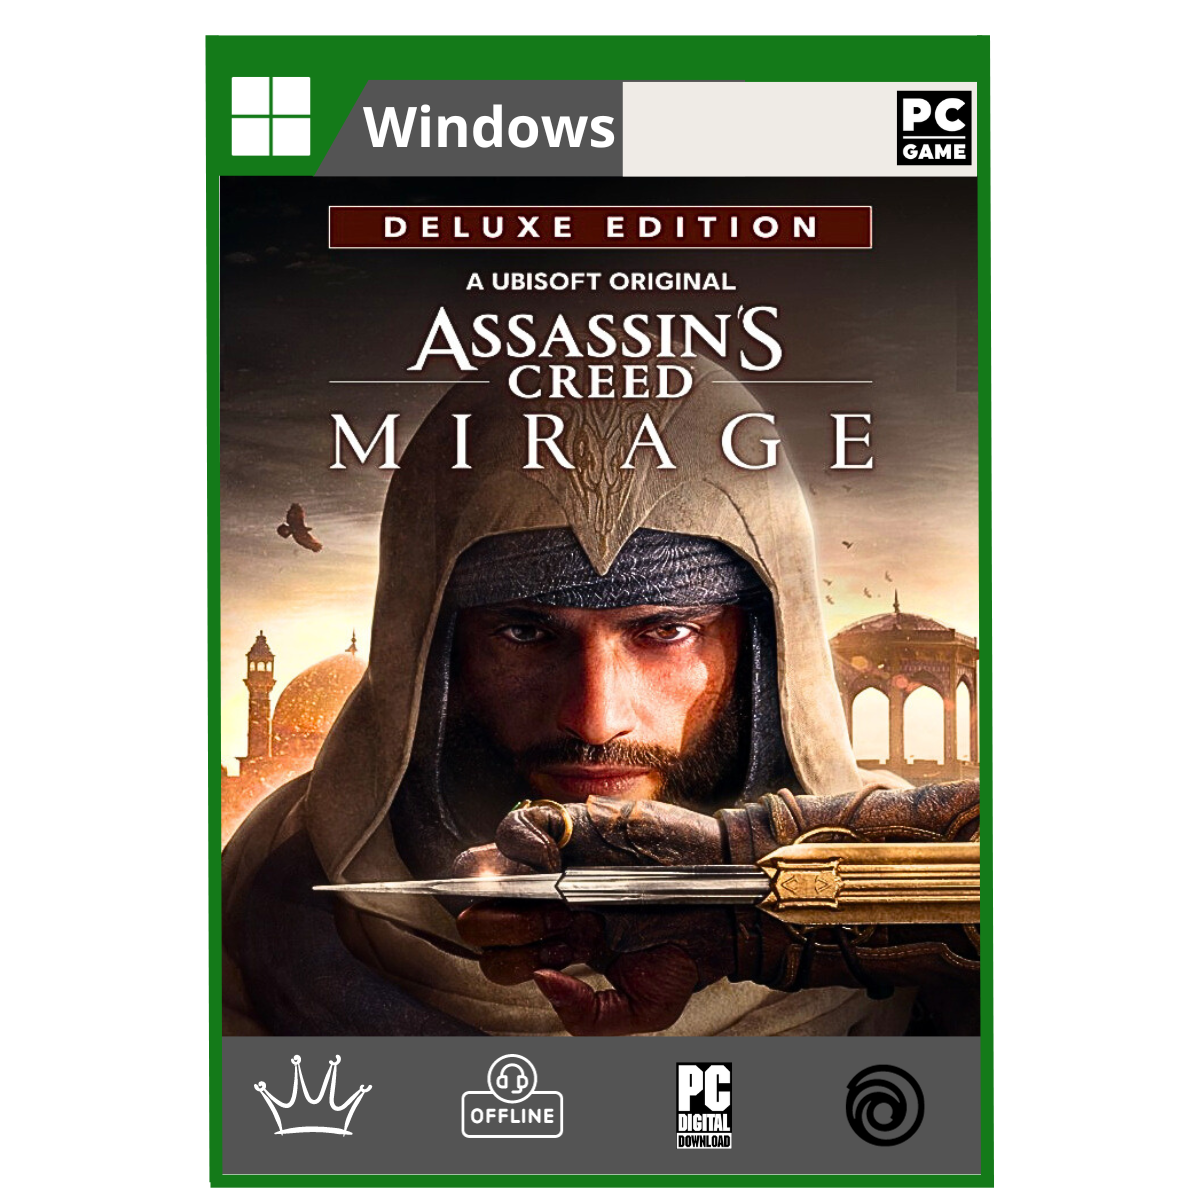 ASSASSIN'S CREED MIRAGE - PC